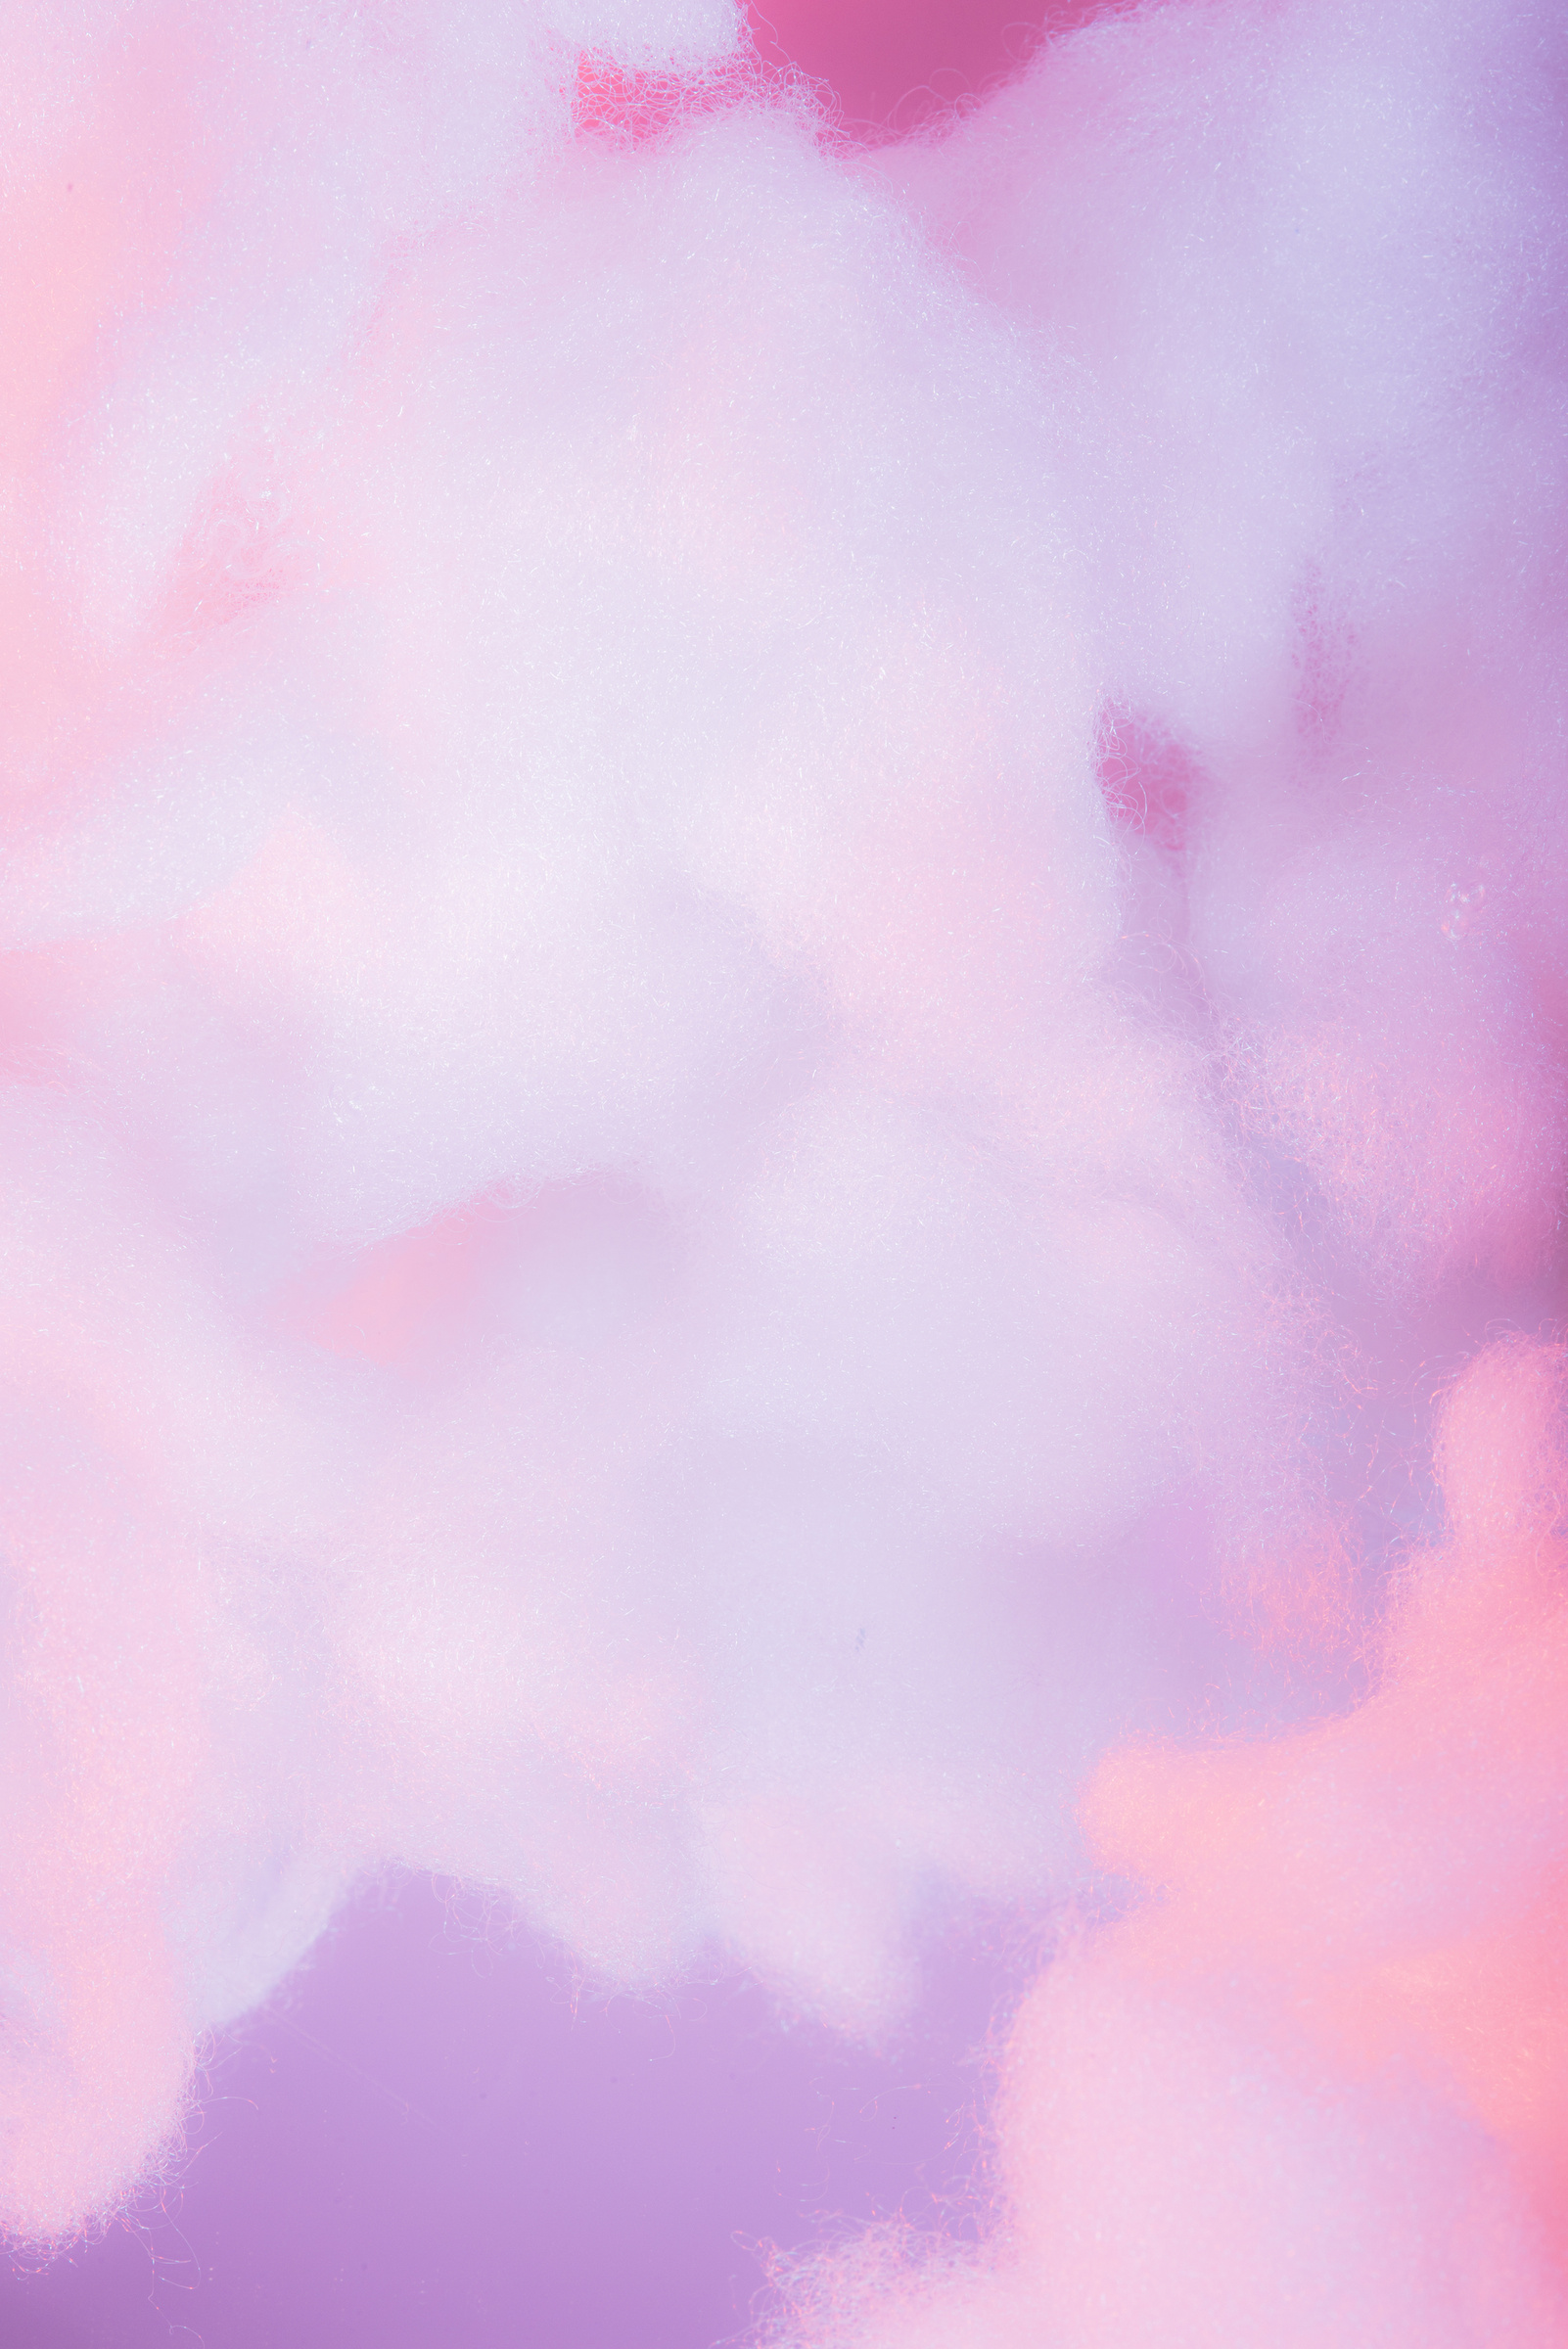 White Clouds on Pastel Gradient Background